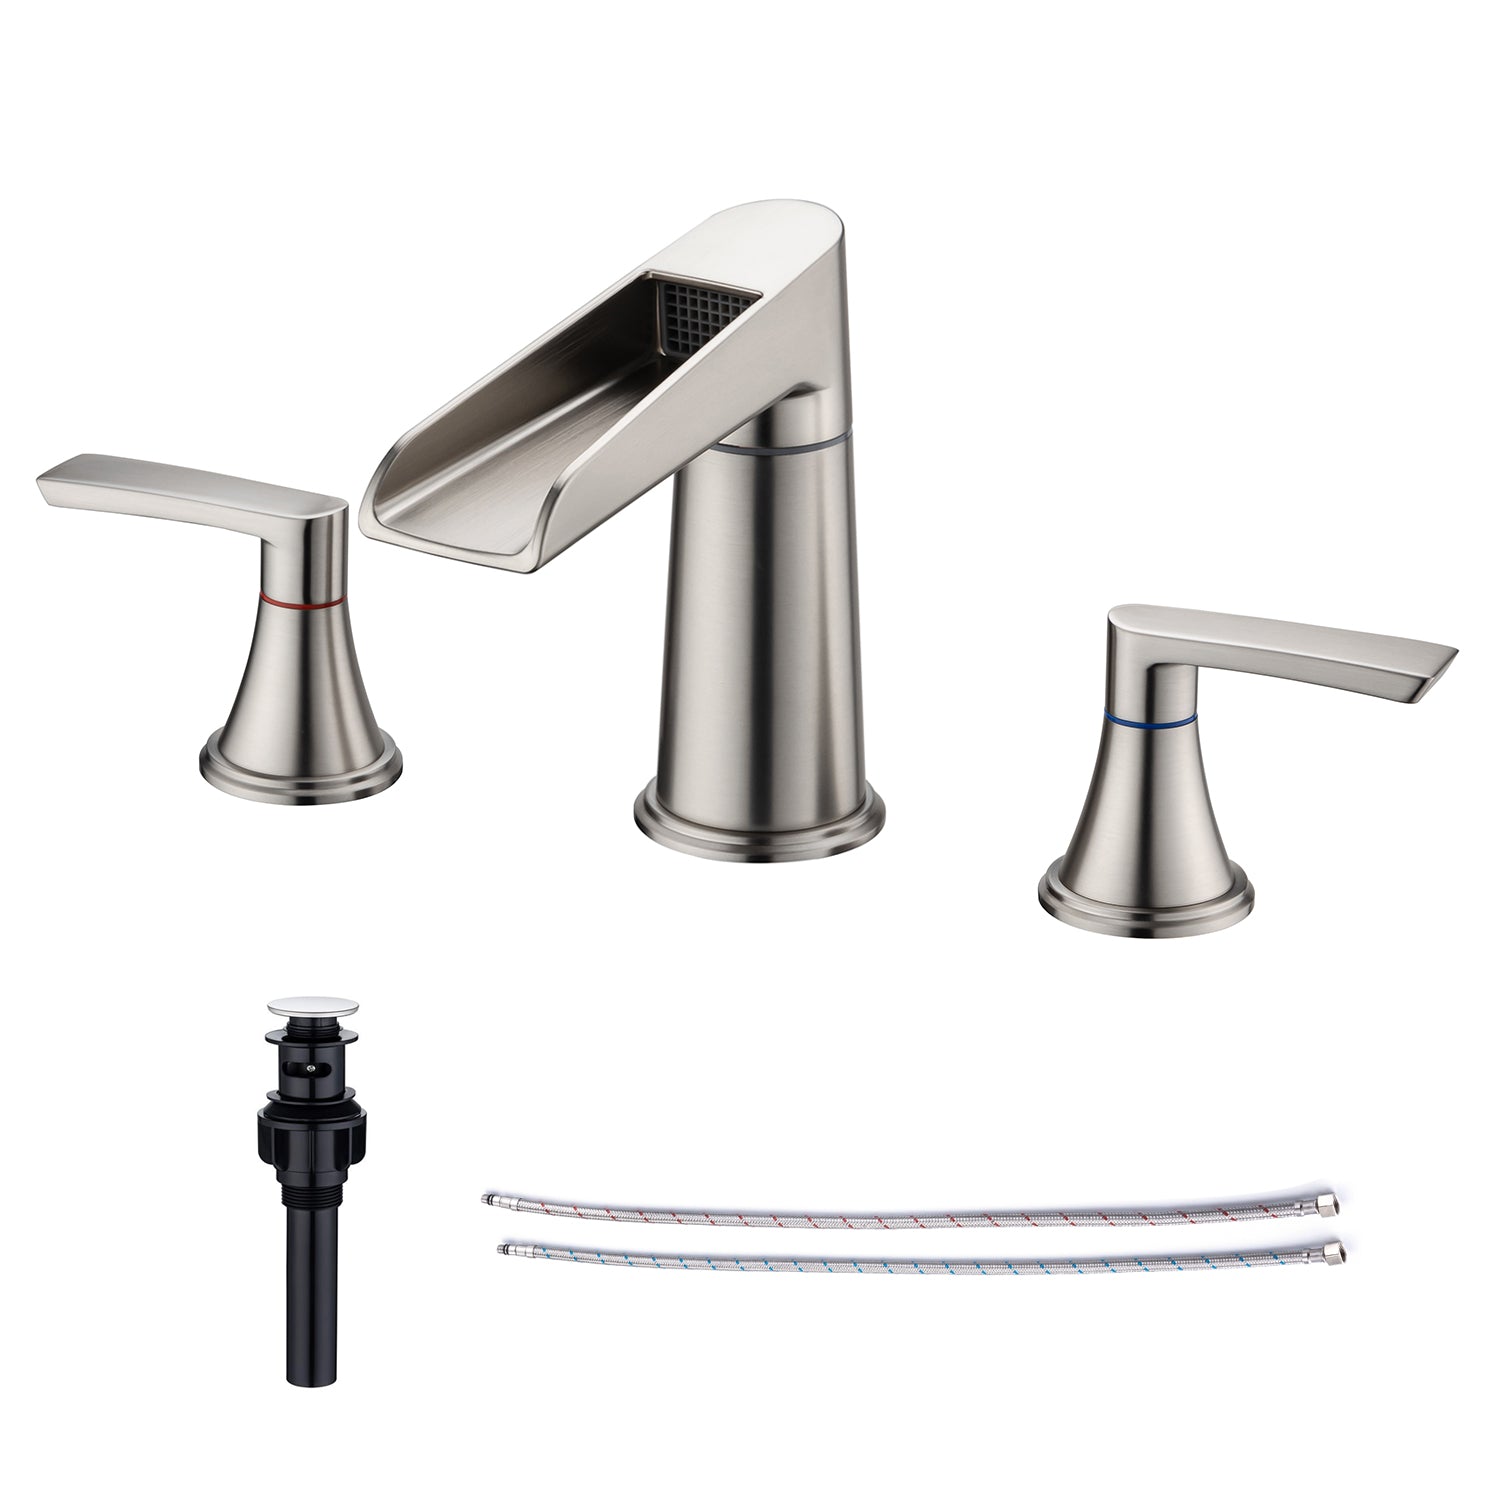 Widespread Faucet 2-handle Bathroom Faucet with Drain Assembly RX83005